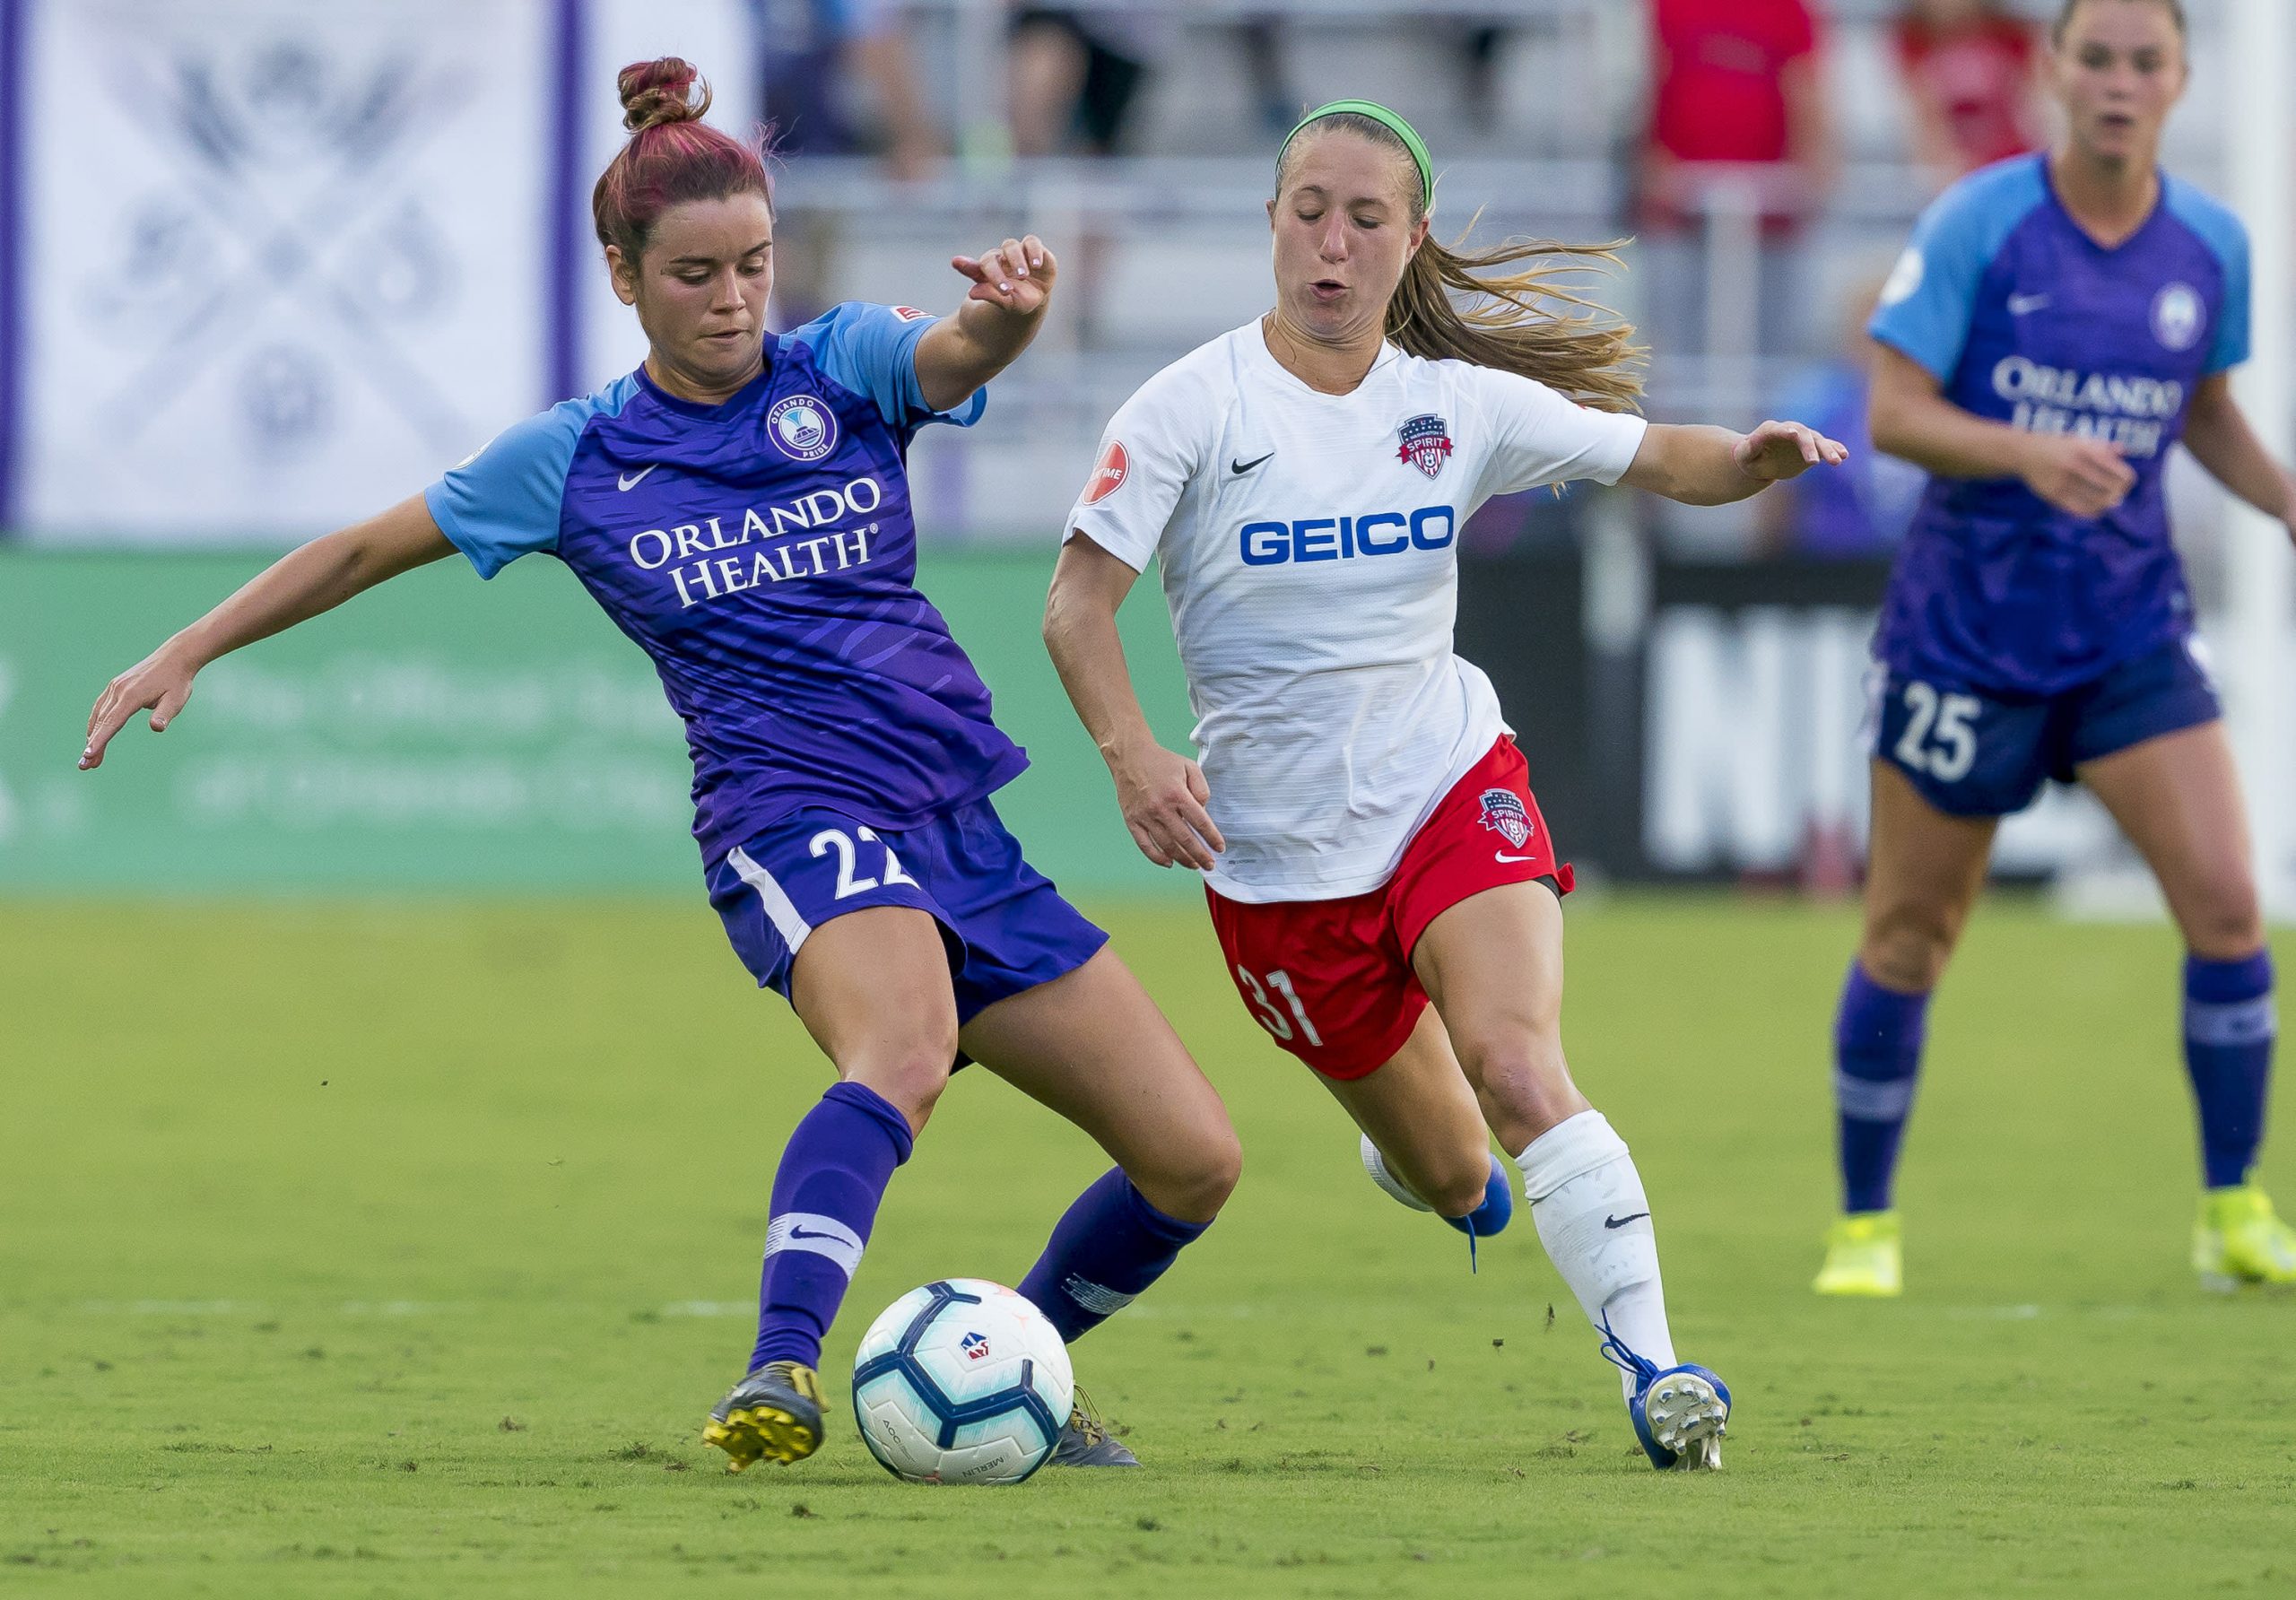 Women's soccer set viewership records in 2020 — now it needs to keep them watching